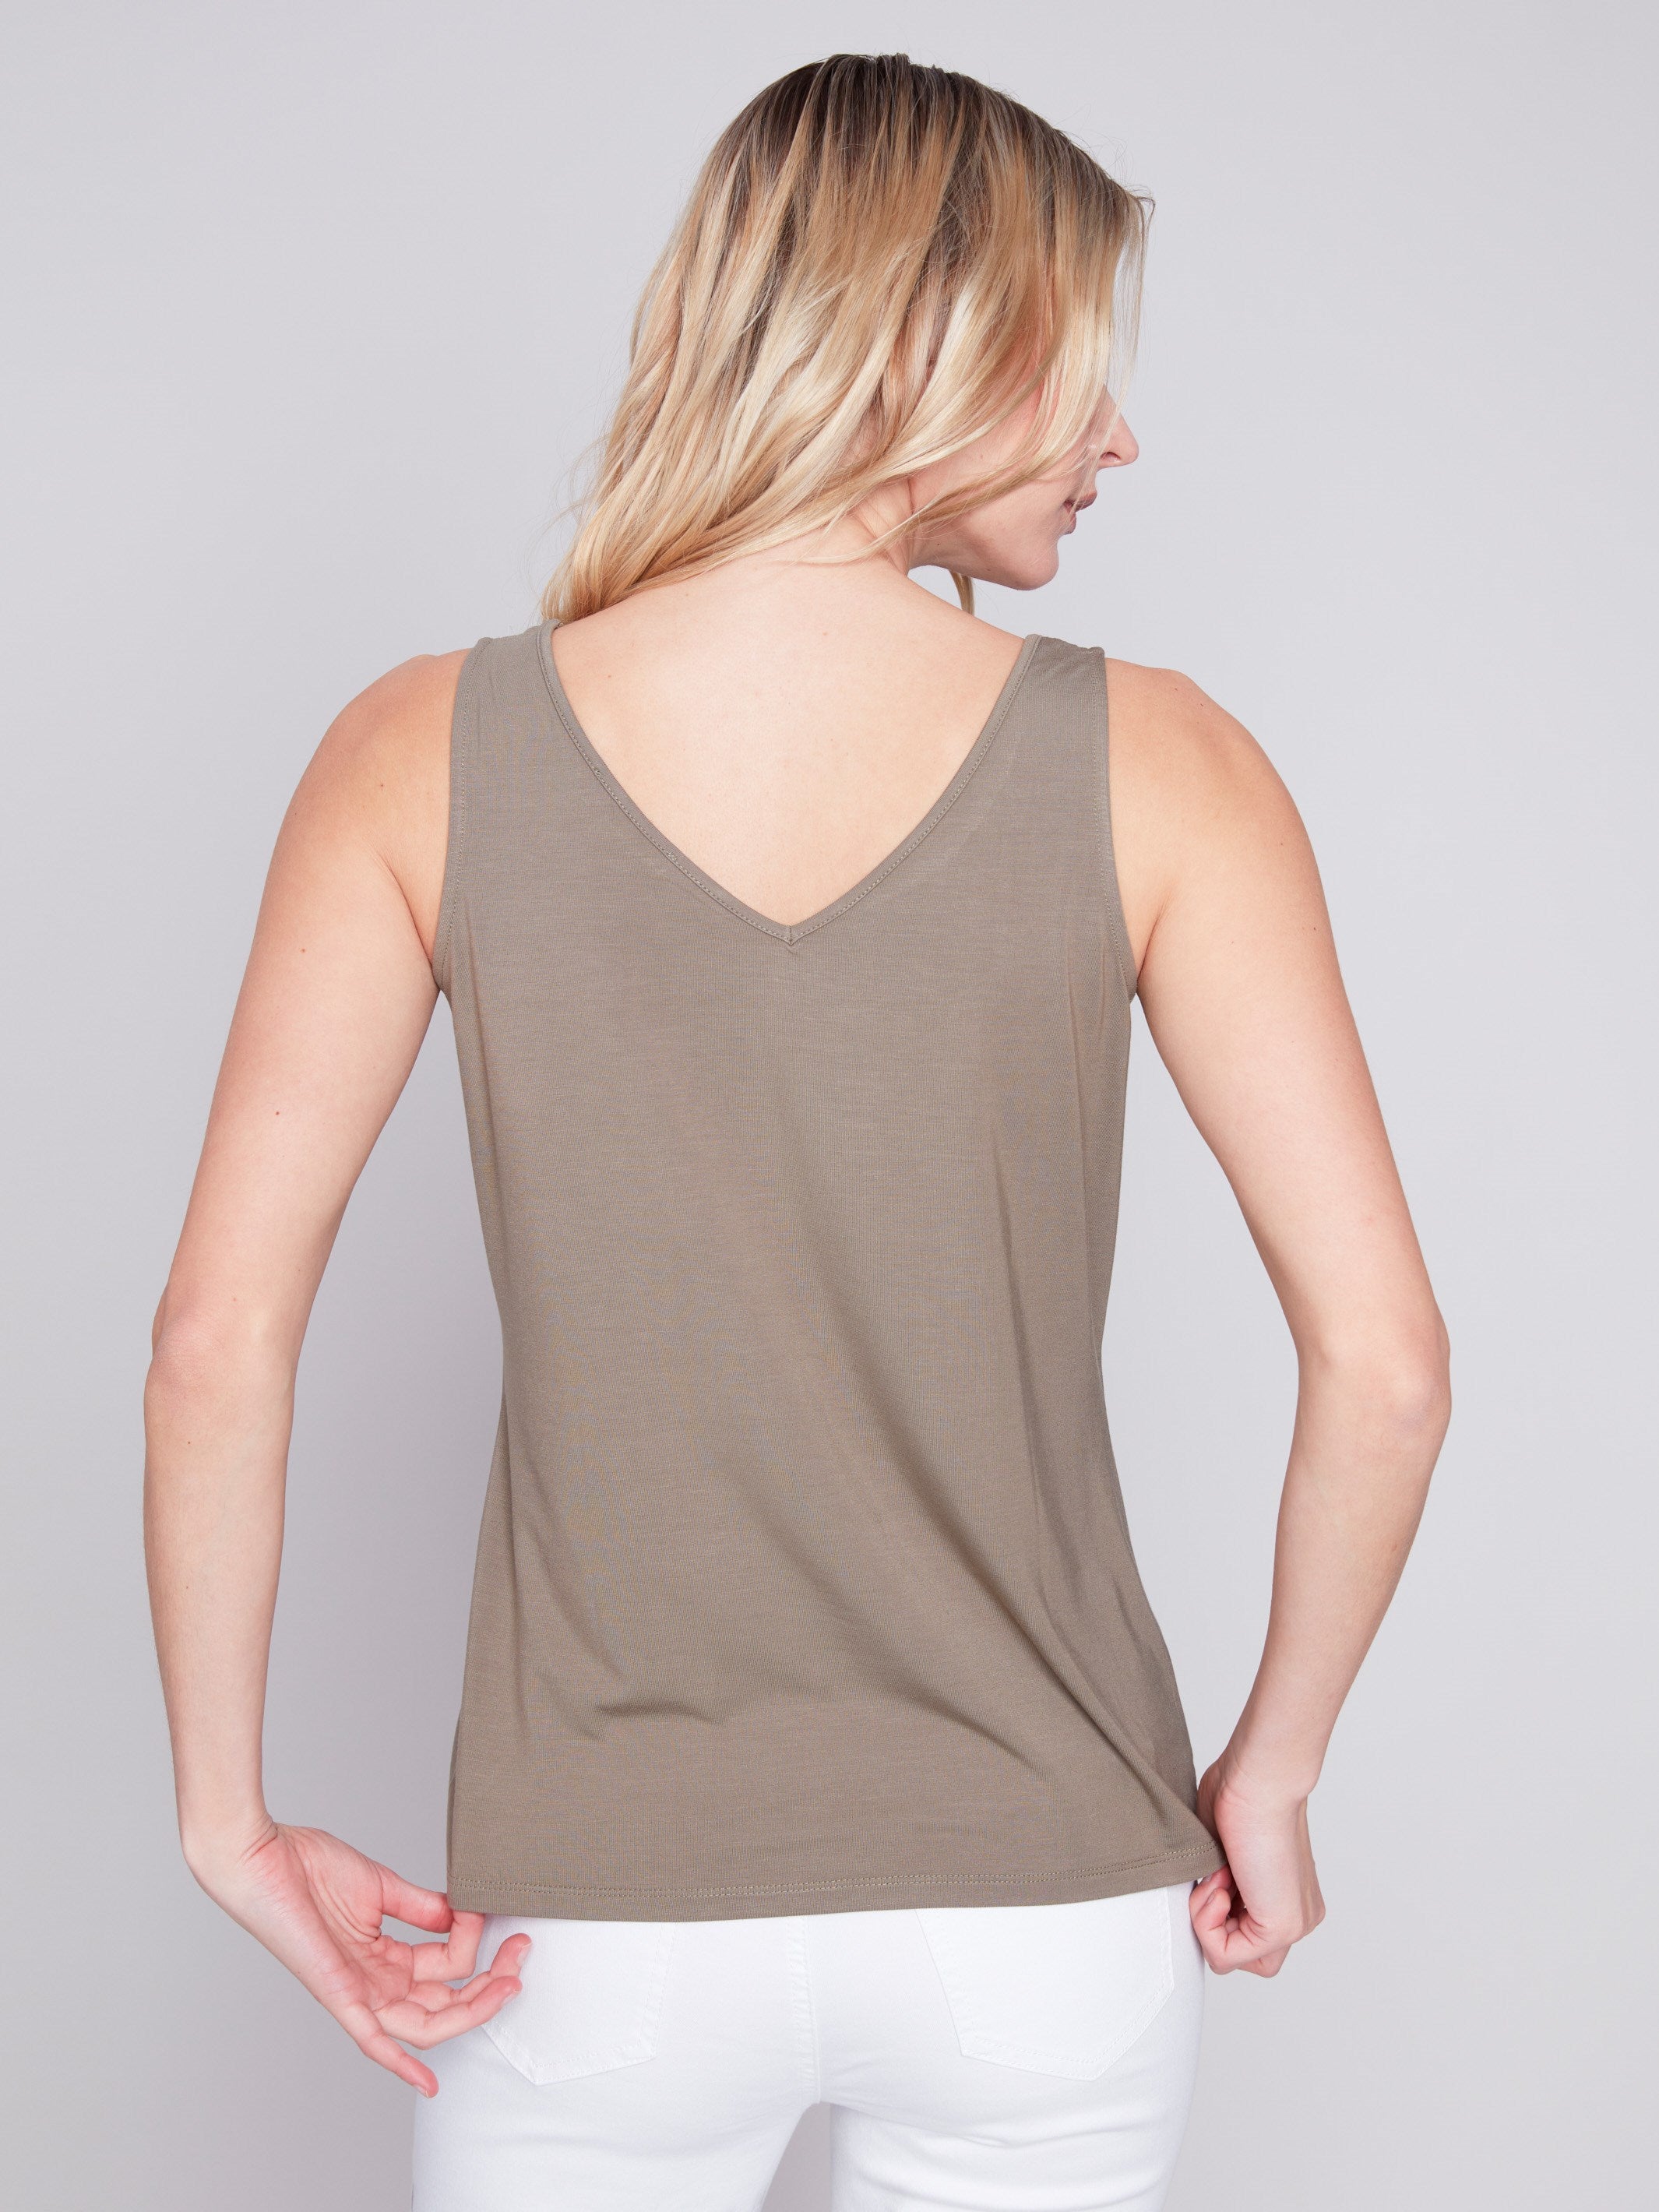 Reversible Bamboo Cami - Celadon - Charlie B Collection Canada - Image 3